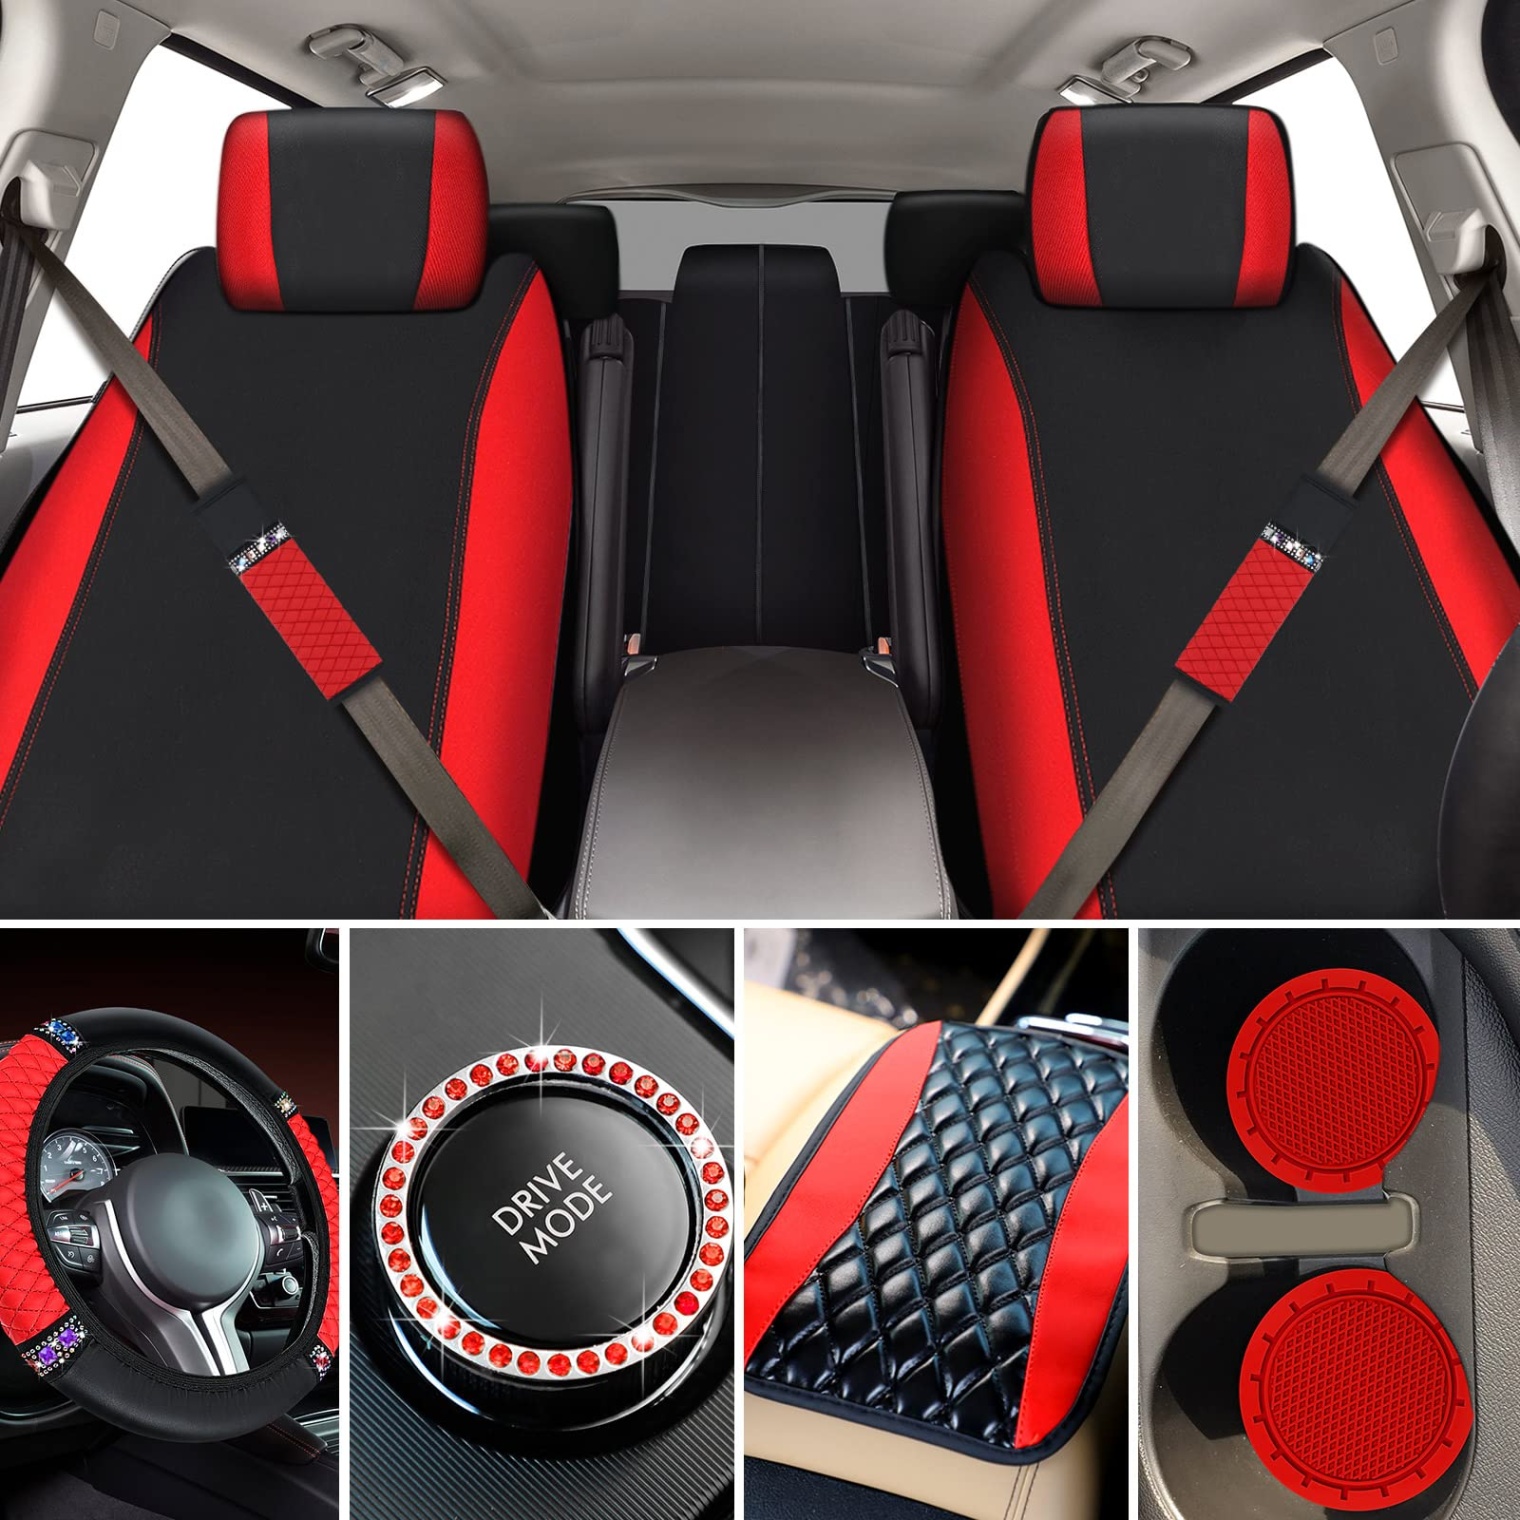 inside car accessories Niche Utama Home  Pcs Black Red Car Accessories Set for Women Leather Red Steering Wheel  Cover Seat Belt Shoulder Pad Armrest Cup Holders Covers Full Crystal Decor